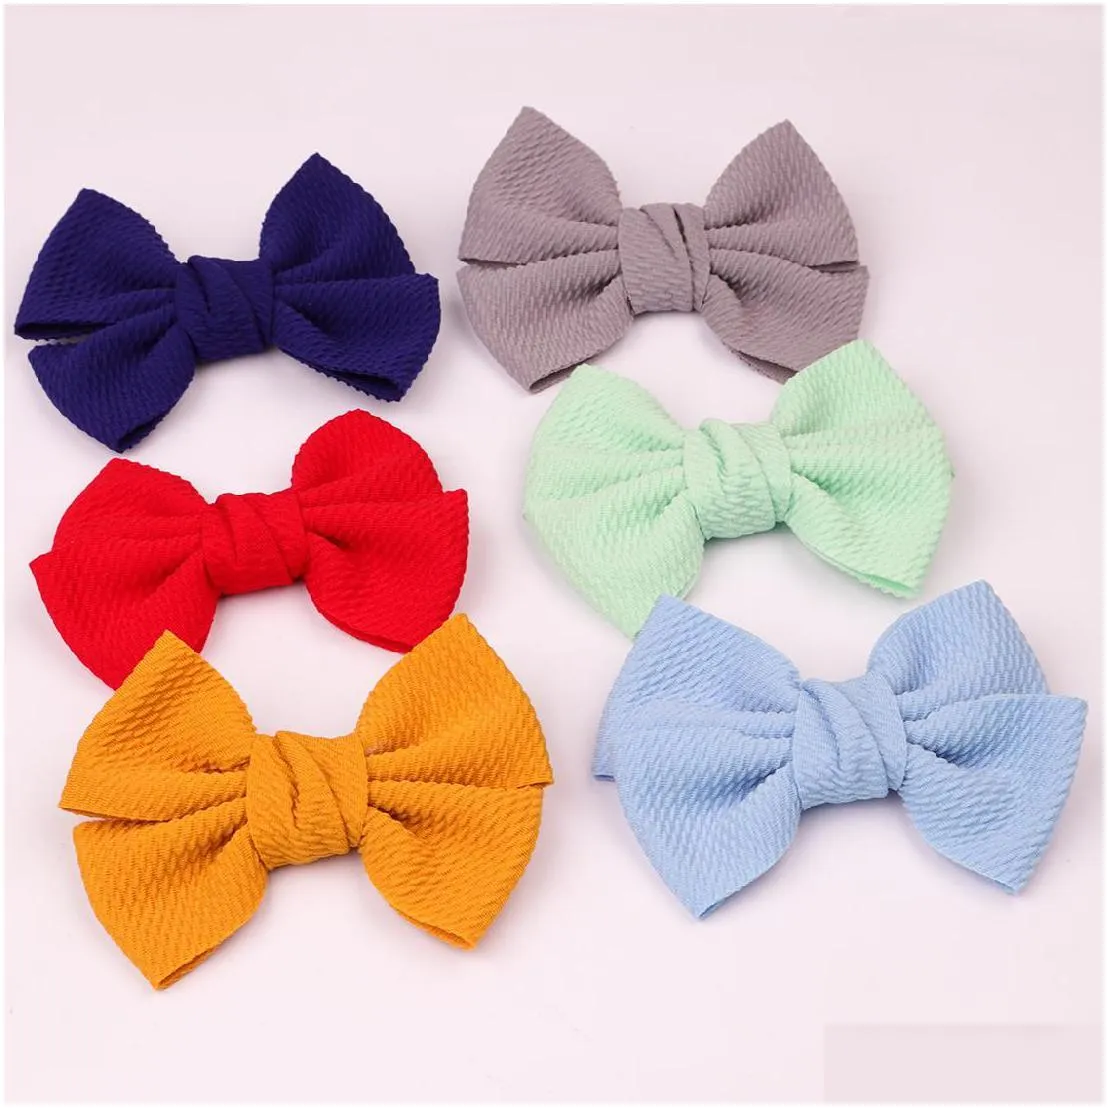 20pcs/lot girls big hair bows velvet hairbow 5.5 inch bow with / without clips women sweet hair accessories children headwear